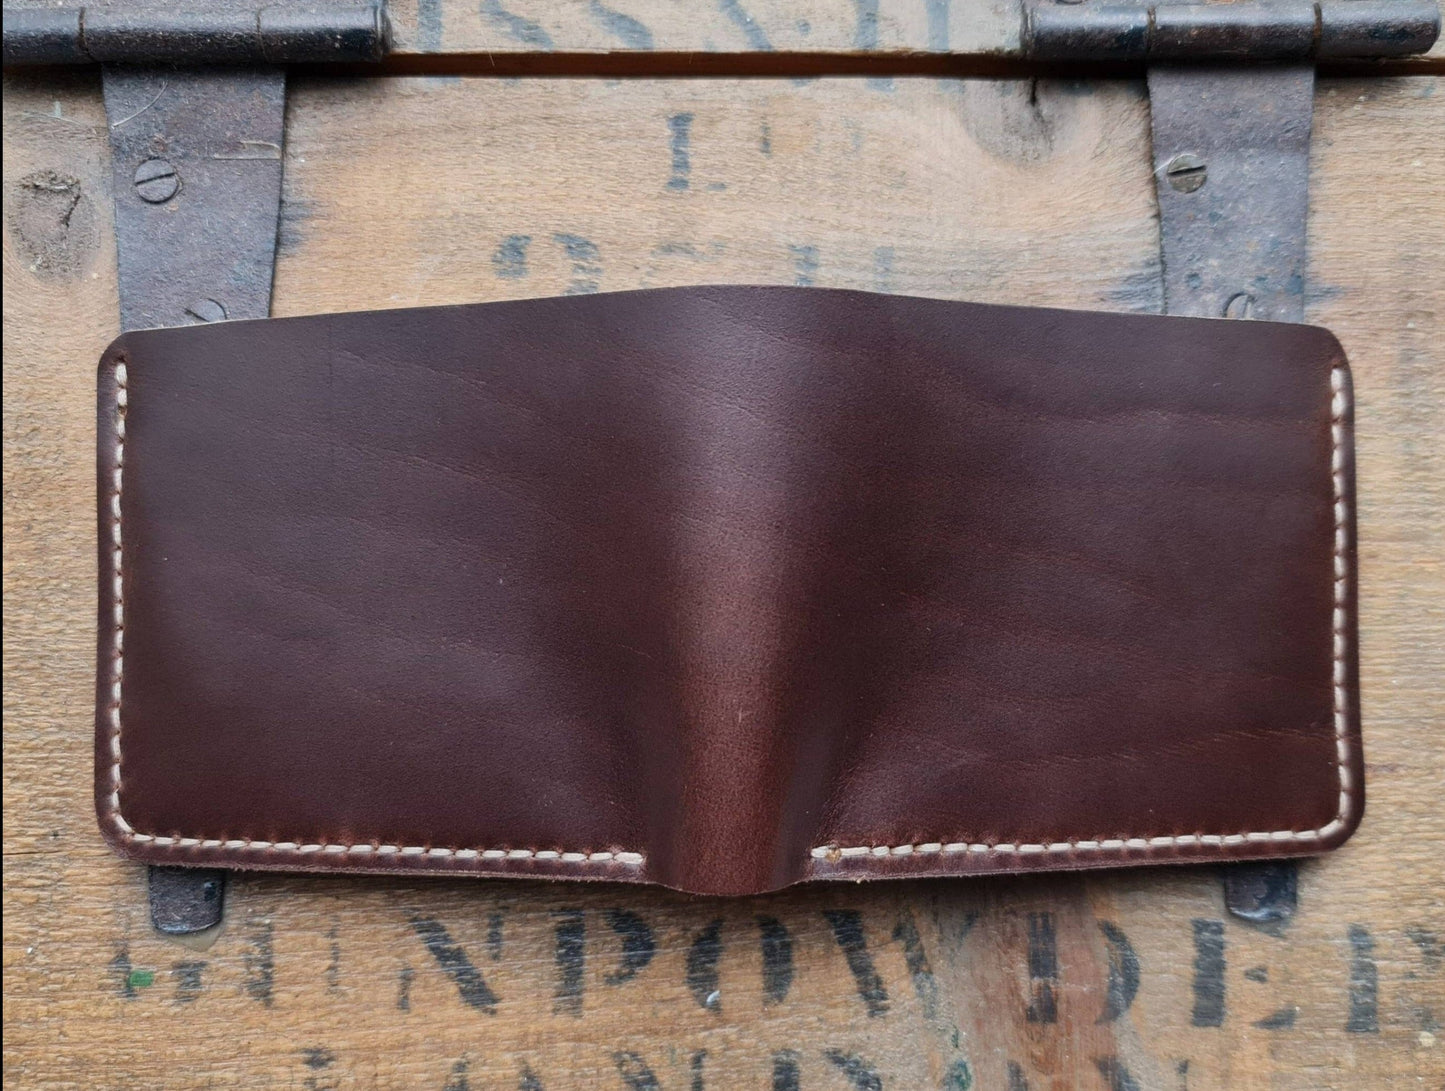 The Frontiersman men's leather wallet with cash and card holder in Brown leather - open back